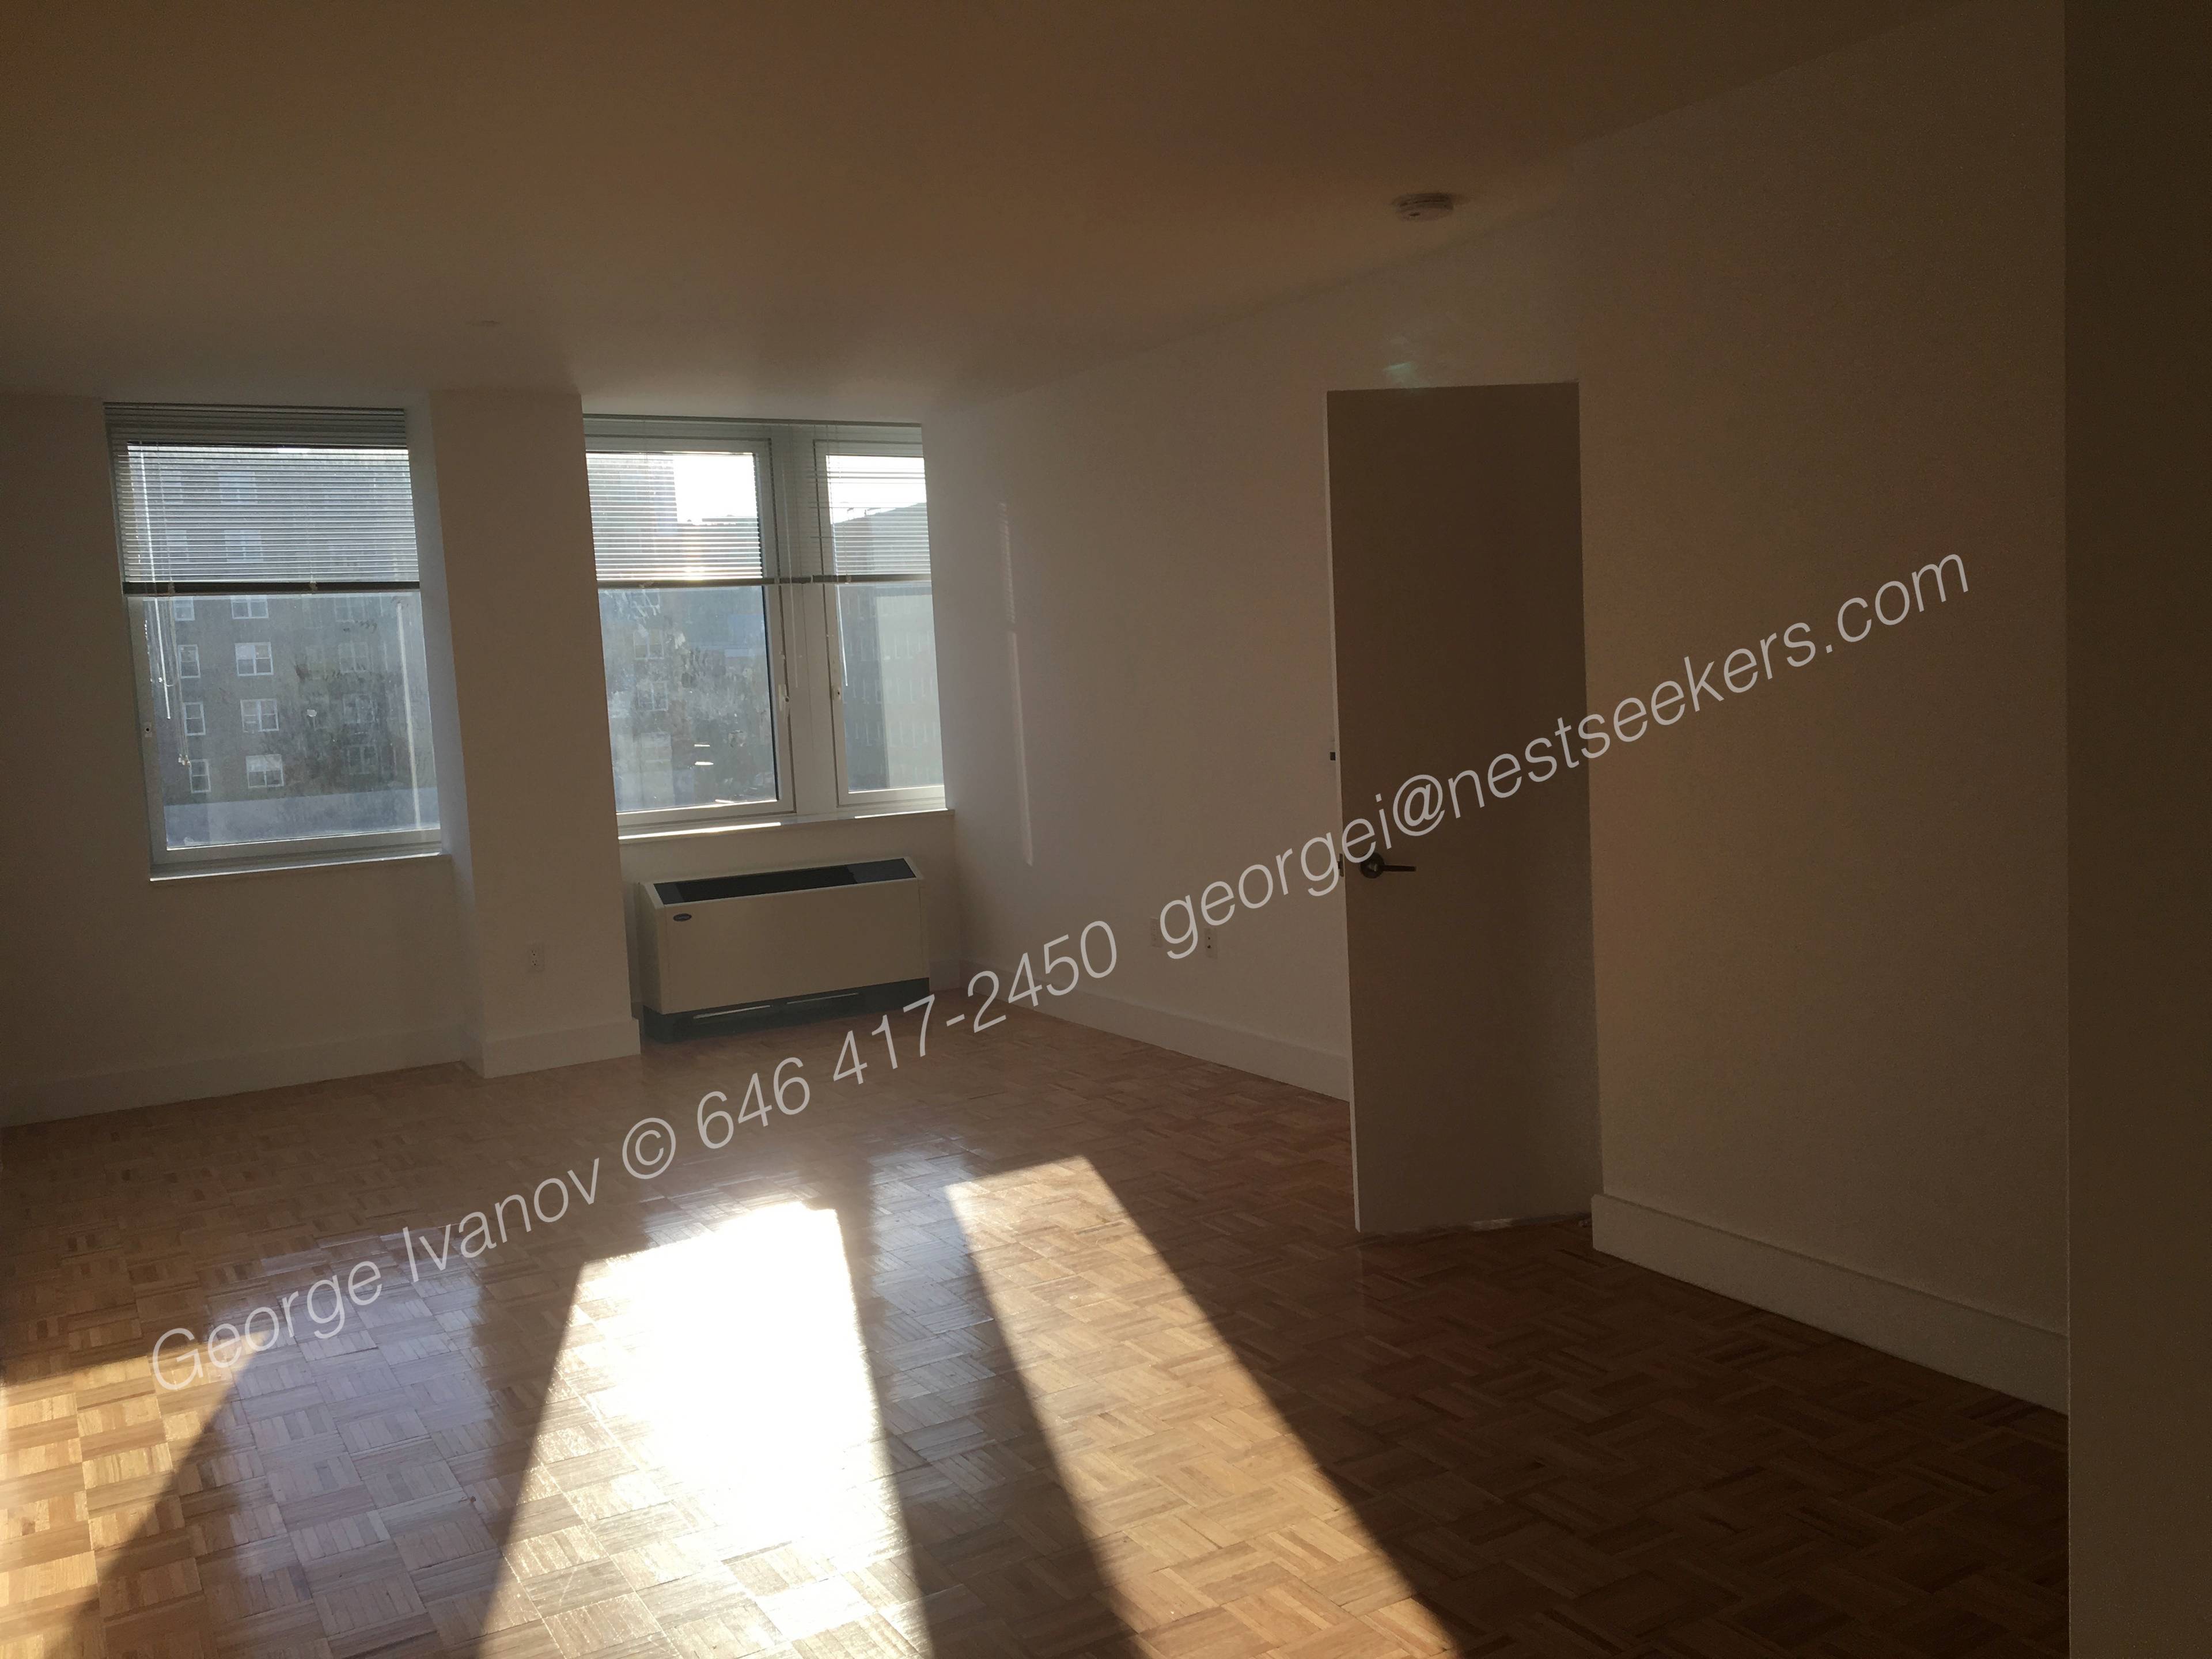 ★★★ ★  ULTRA LUXURY 2Bed ( 1bed + Den )  / 2Bath  Apartments .  Condo Style Finishes .  Washer & Dryer in UNIT.24Hr Doorman, SPECTACULAR AMENETIES. 20 min to MIdtown Manhattan